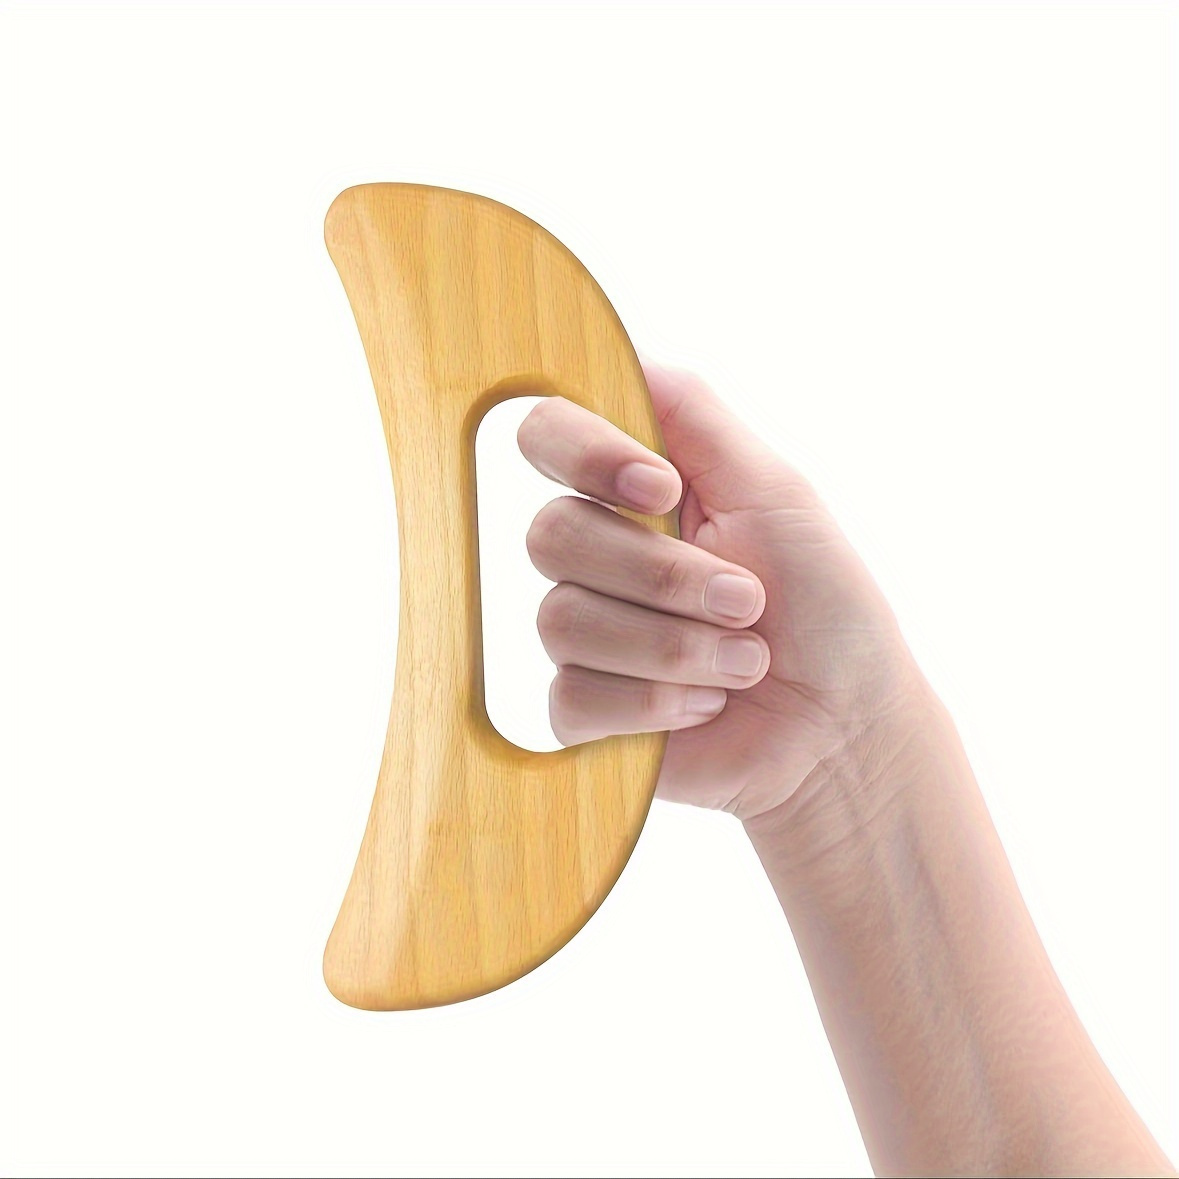 

1pc Beech Wood Gua Sha Scraping Massage Tool, Ergonomic Full-body Meridian Massage Board For Facial And Body Relaxation, Ideal For Dancers, Elderly, Sportsmen, And Office Workers